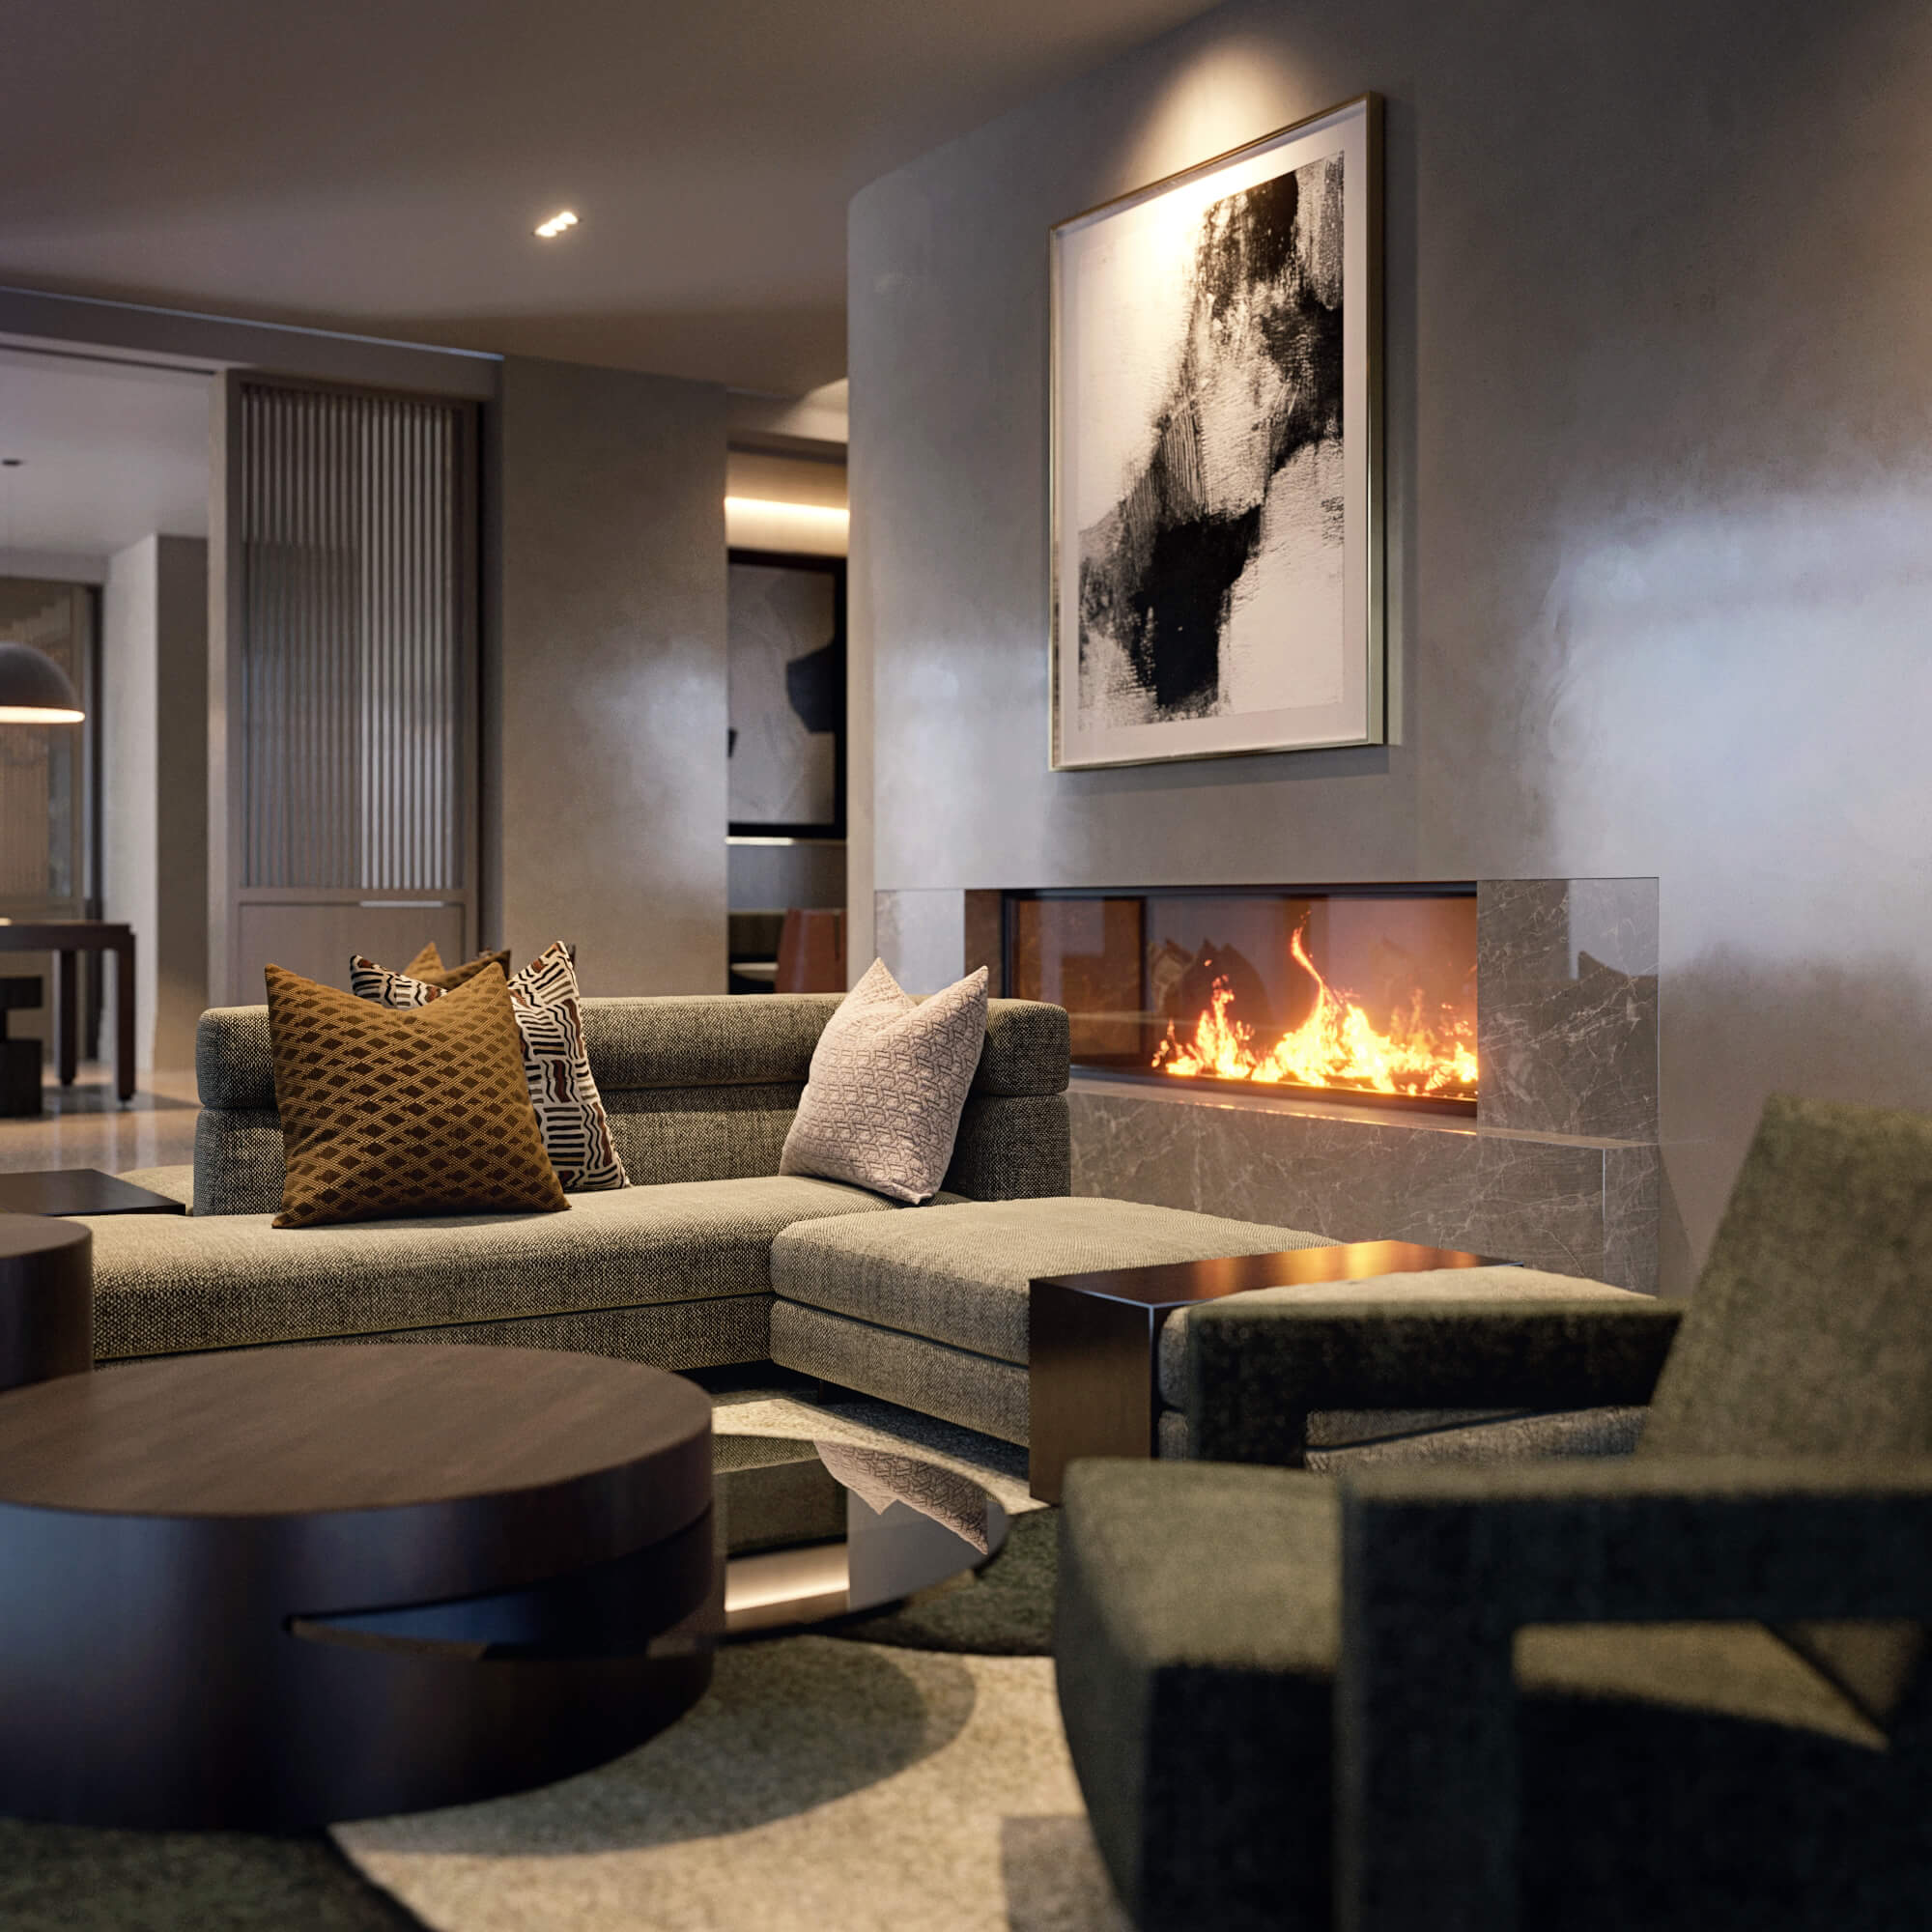 3D interior visualizations for a sophisticated hotel in Dallas